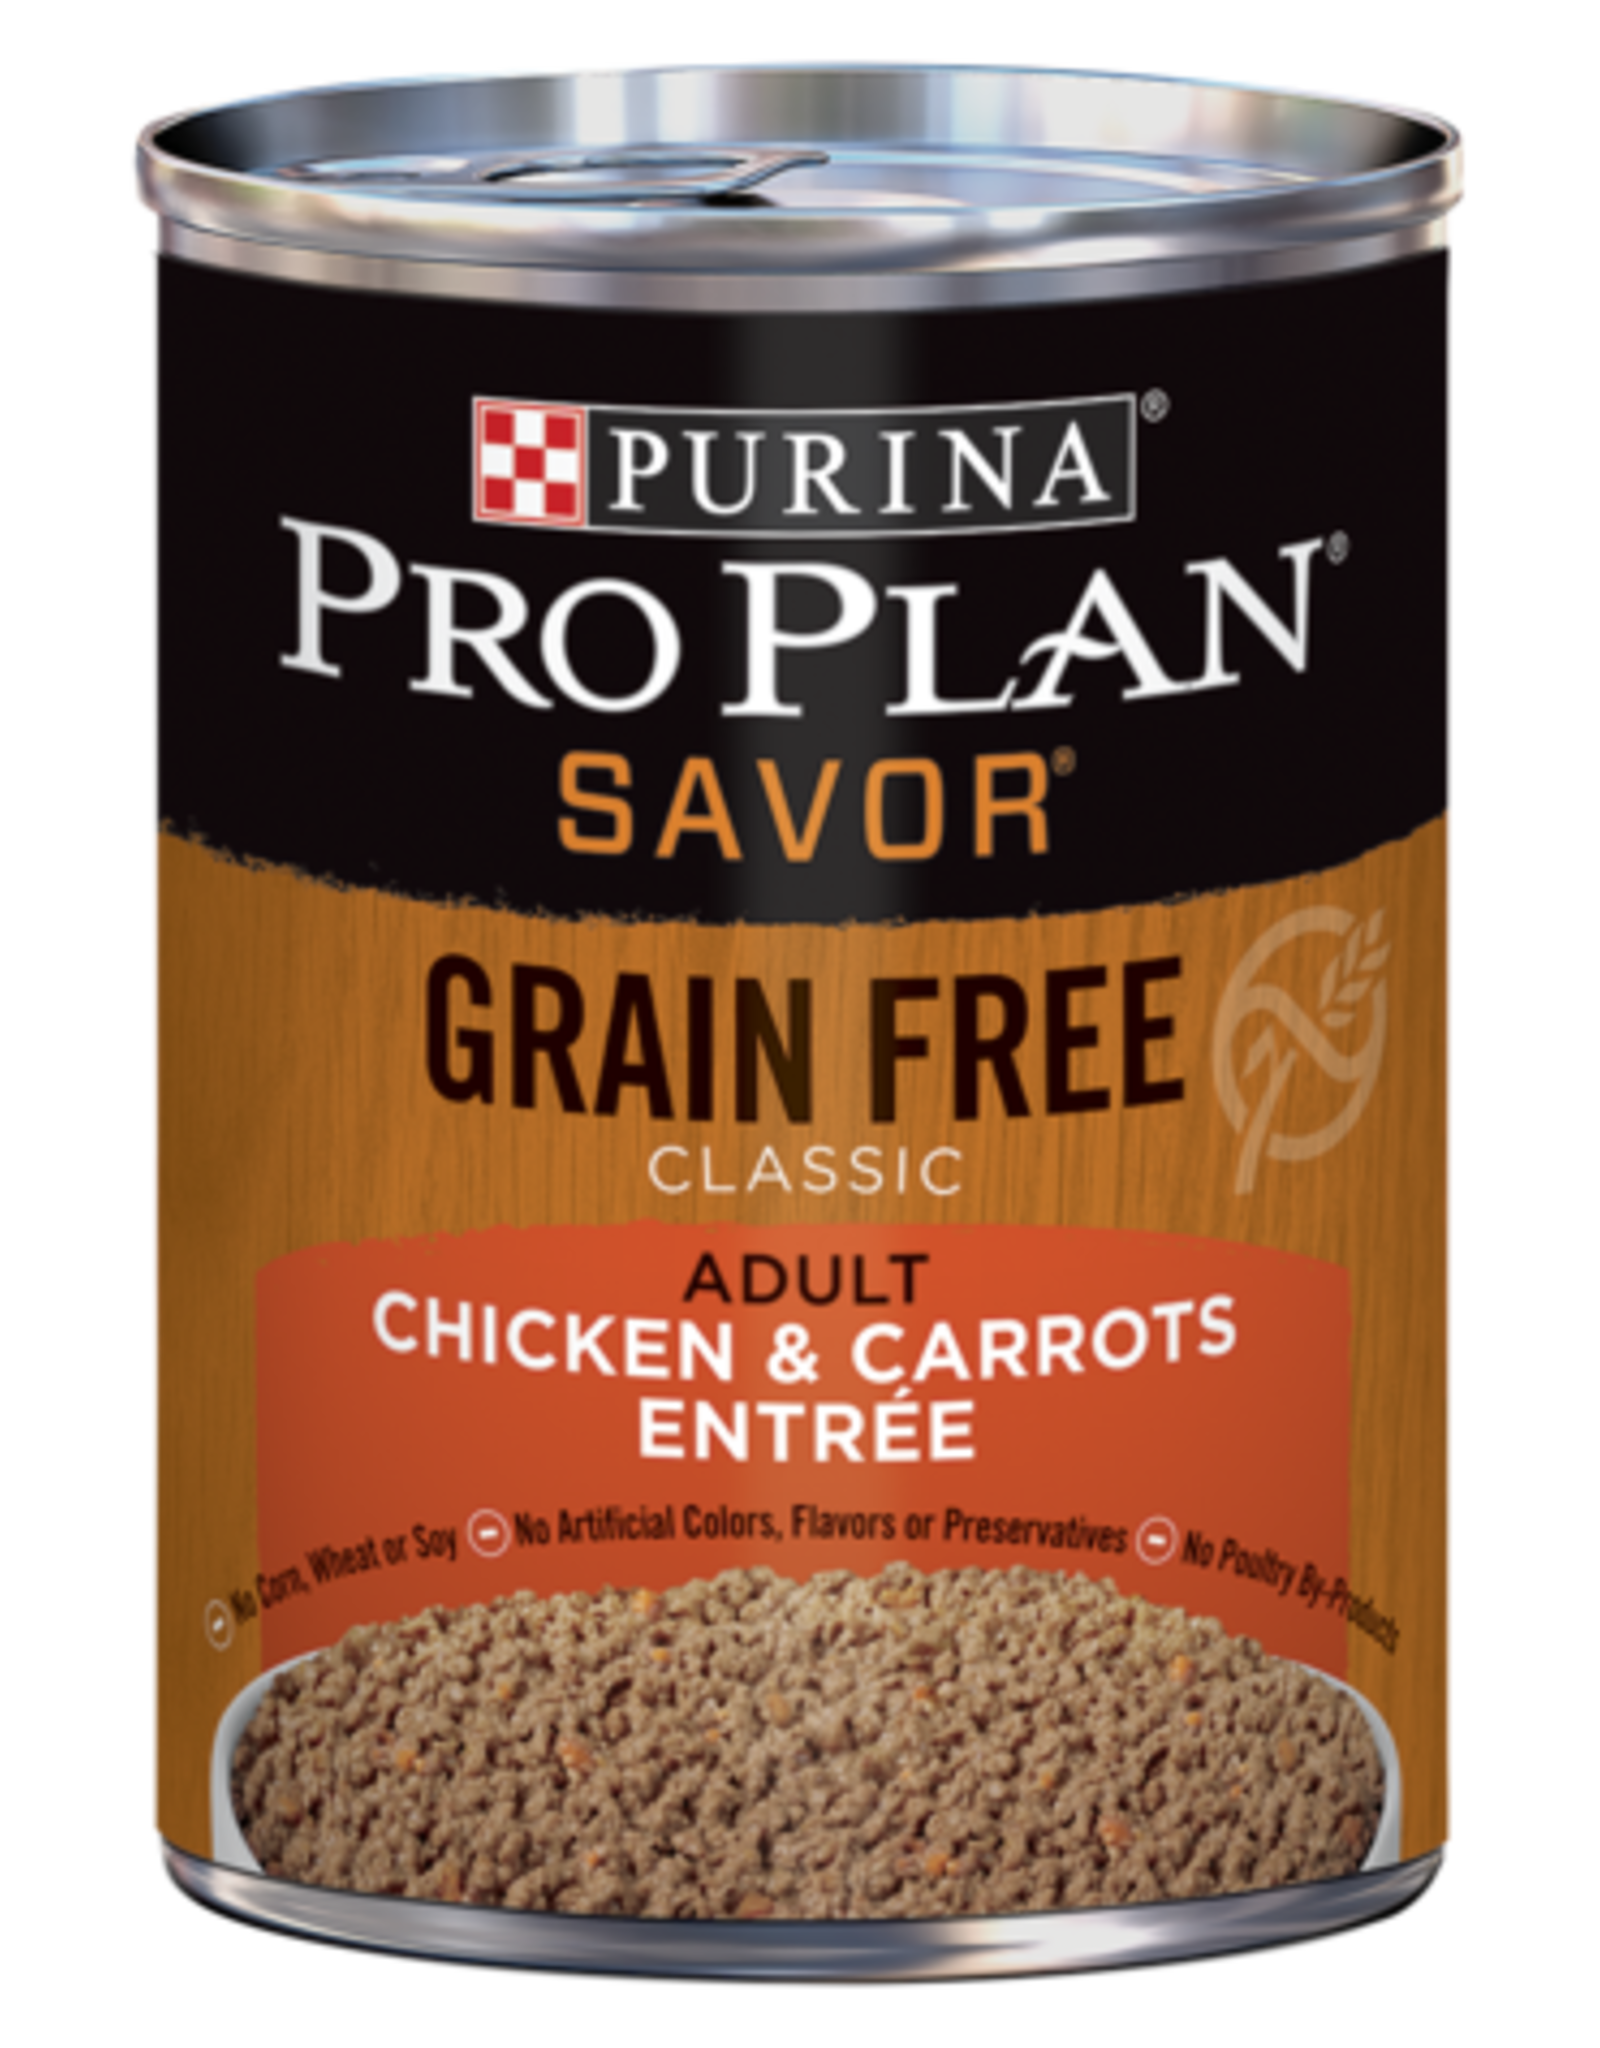 NESTLE PURINA PETCARE PRO PLAN DOG CAN CHICKEN & CARROTS GRAIN FREE 12.5OZ CASE OF 12